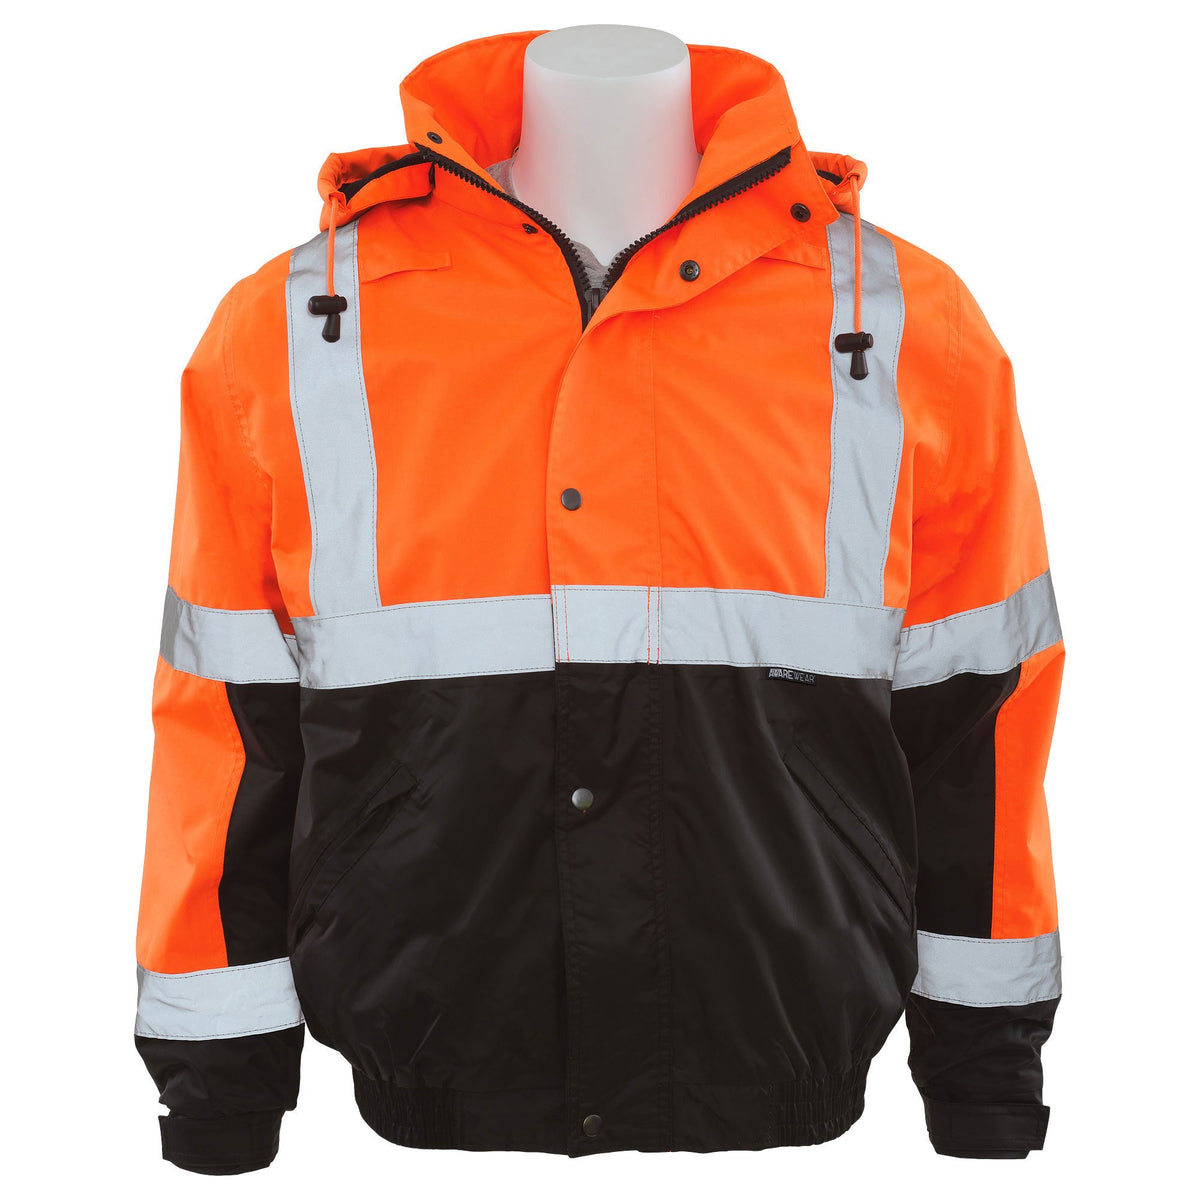 W106 Class 3 Bomber Jacket with Storm Flap and Hood